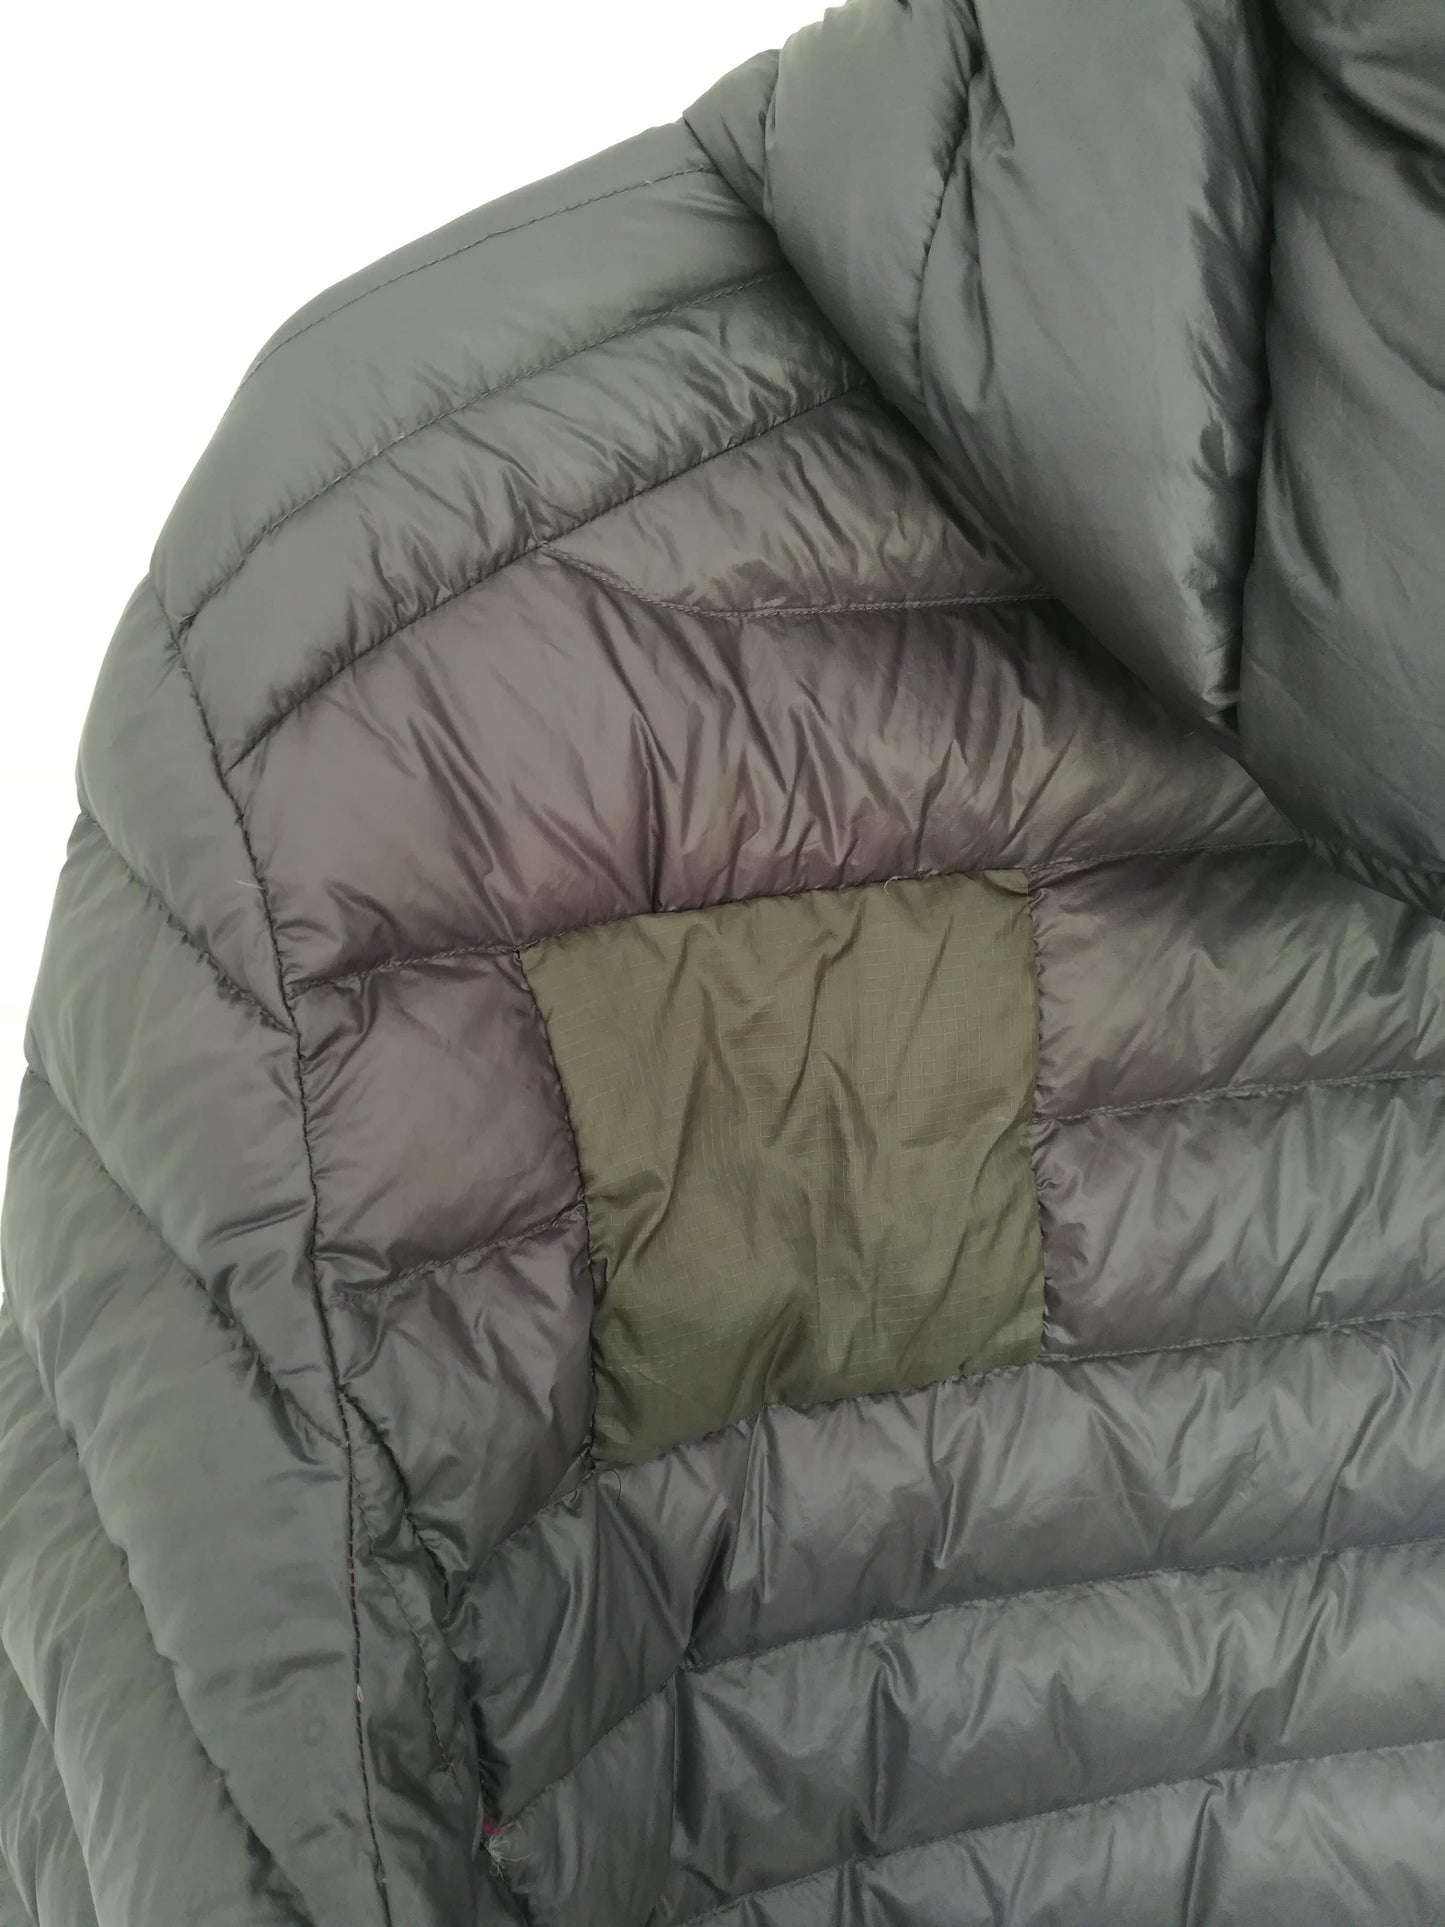 Insulated and Puffa Jacket - Seam Taping or Sealing